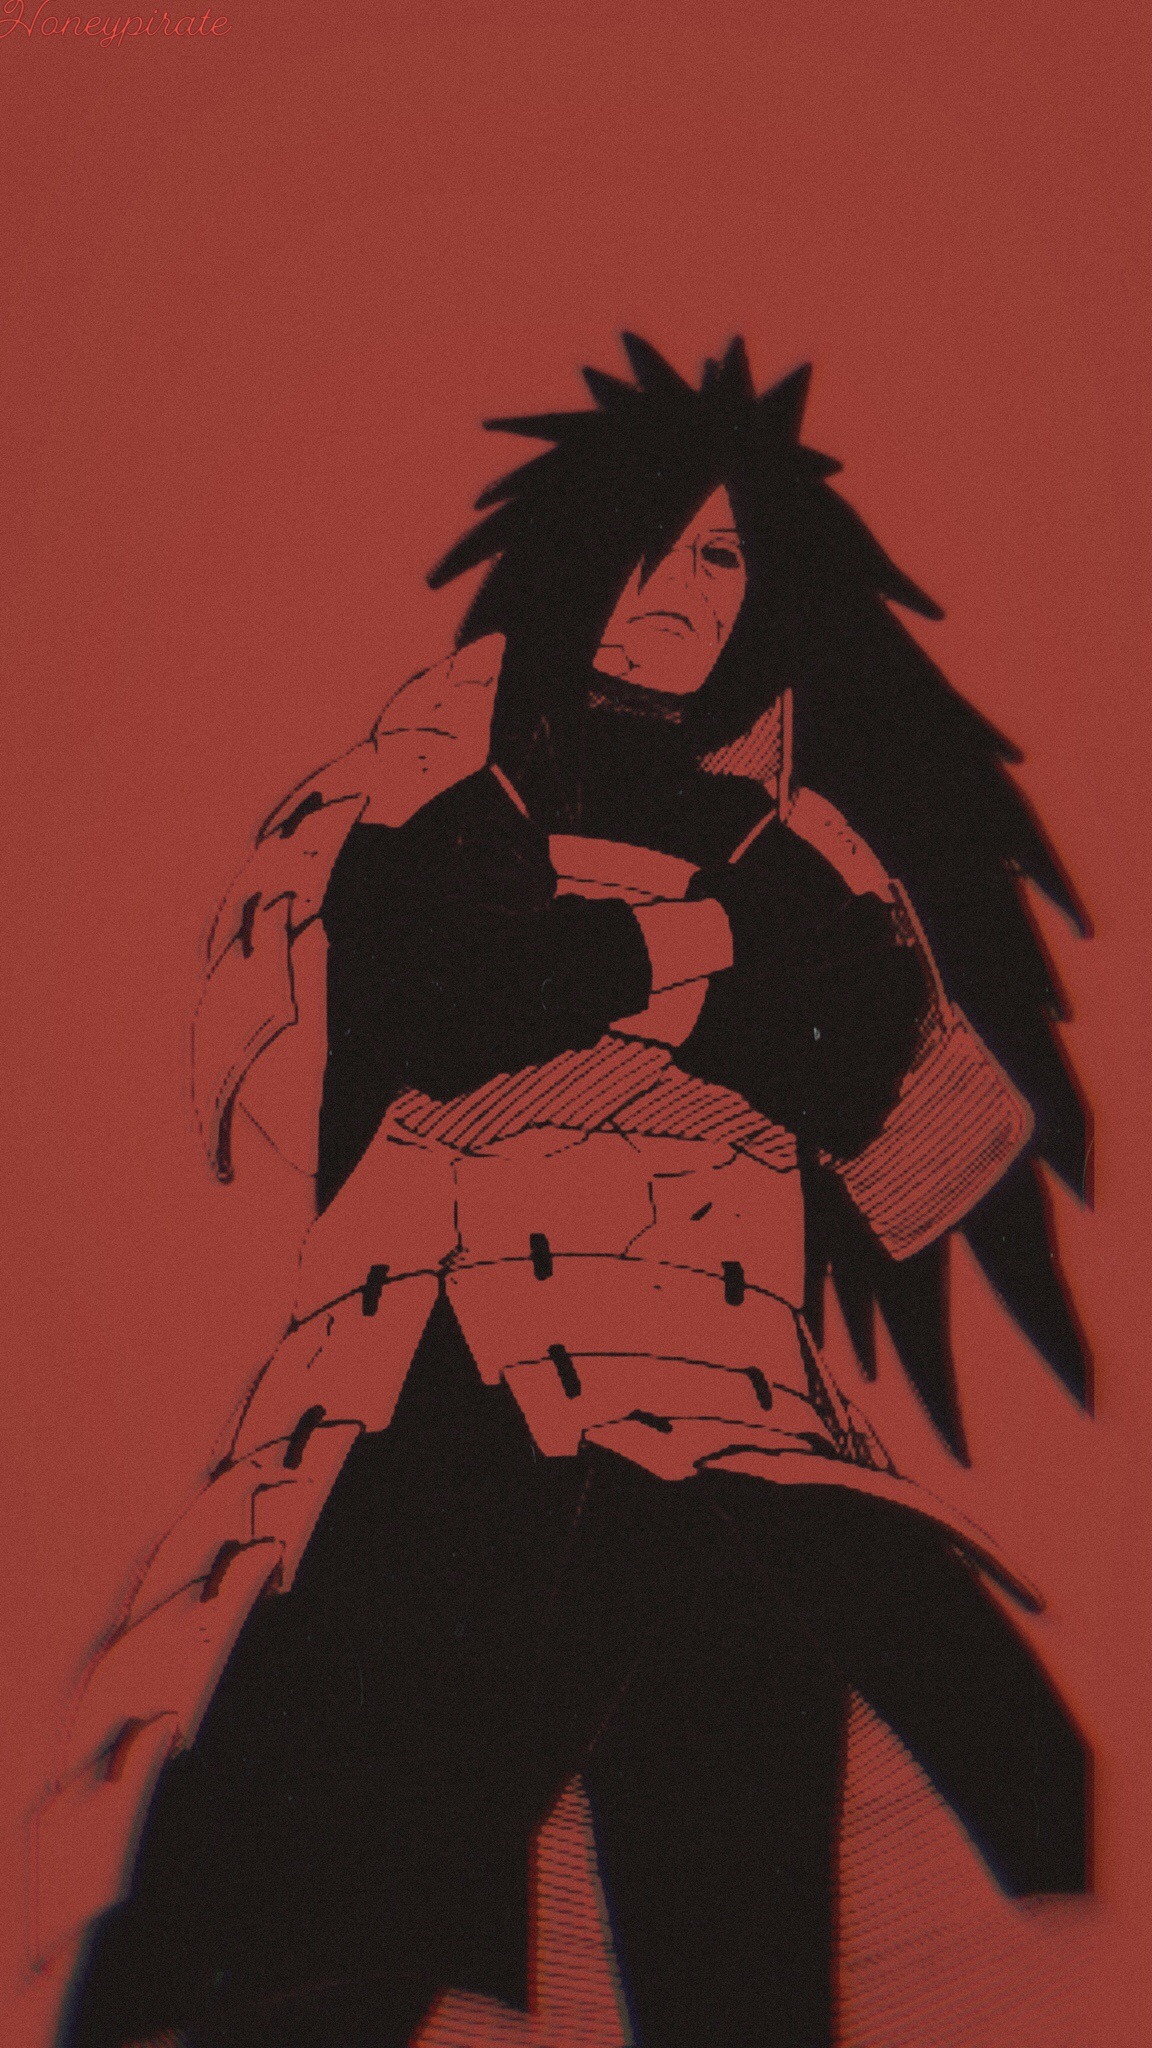 Damn Nerd, Here are the simple naruto wallpaper I made from